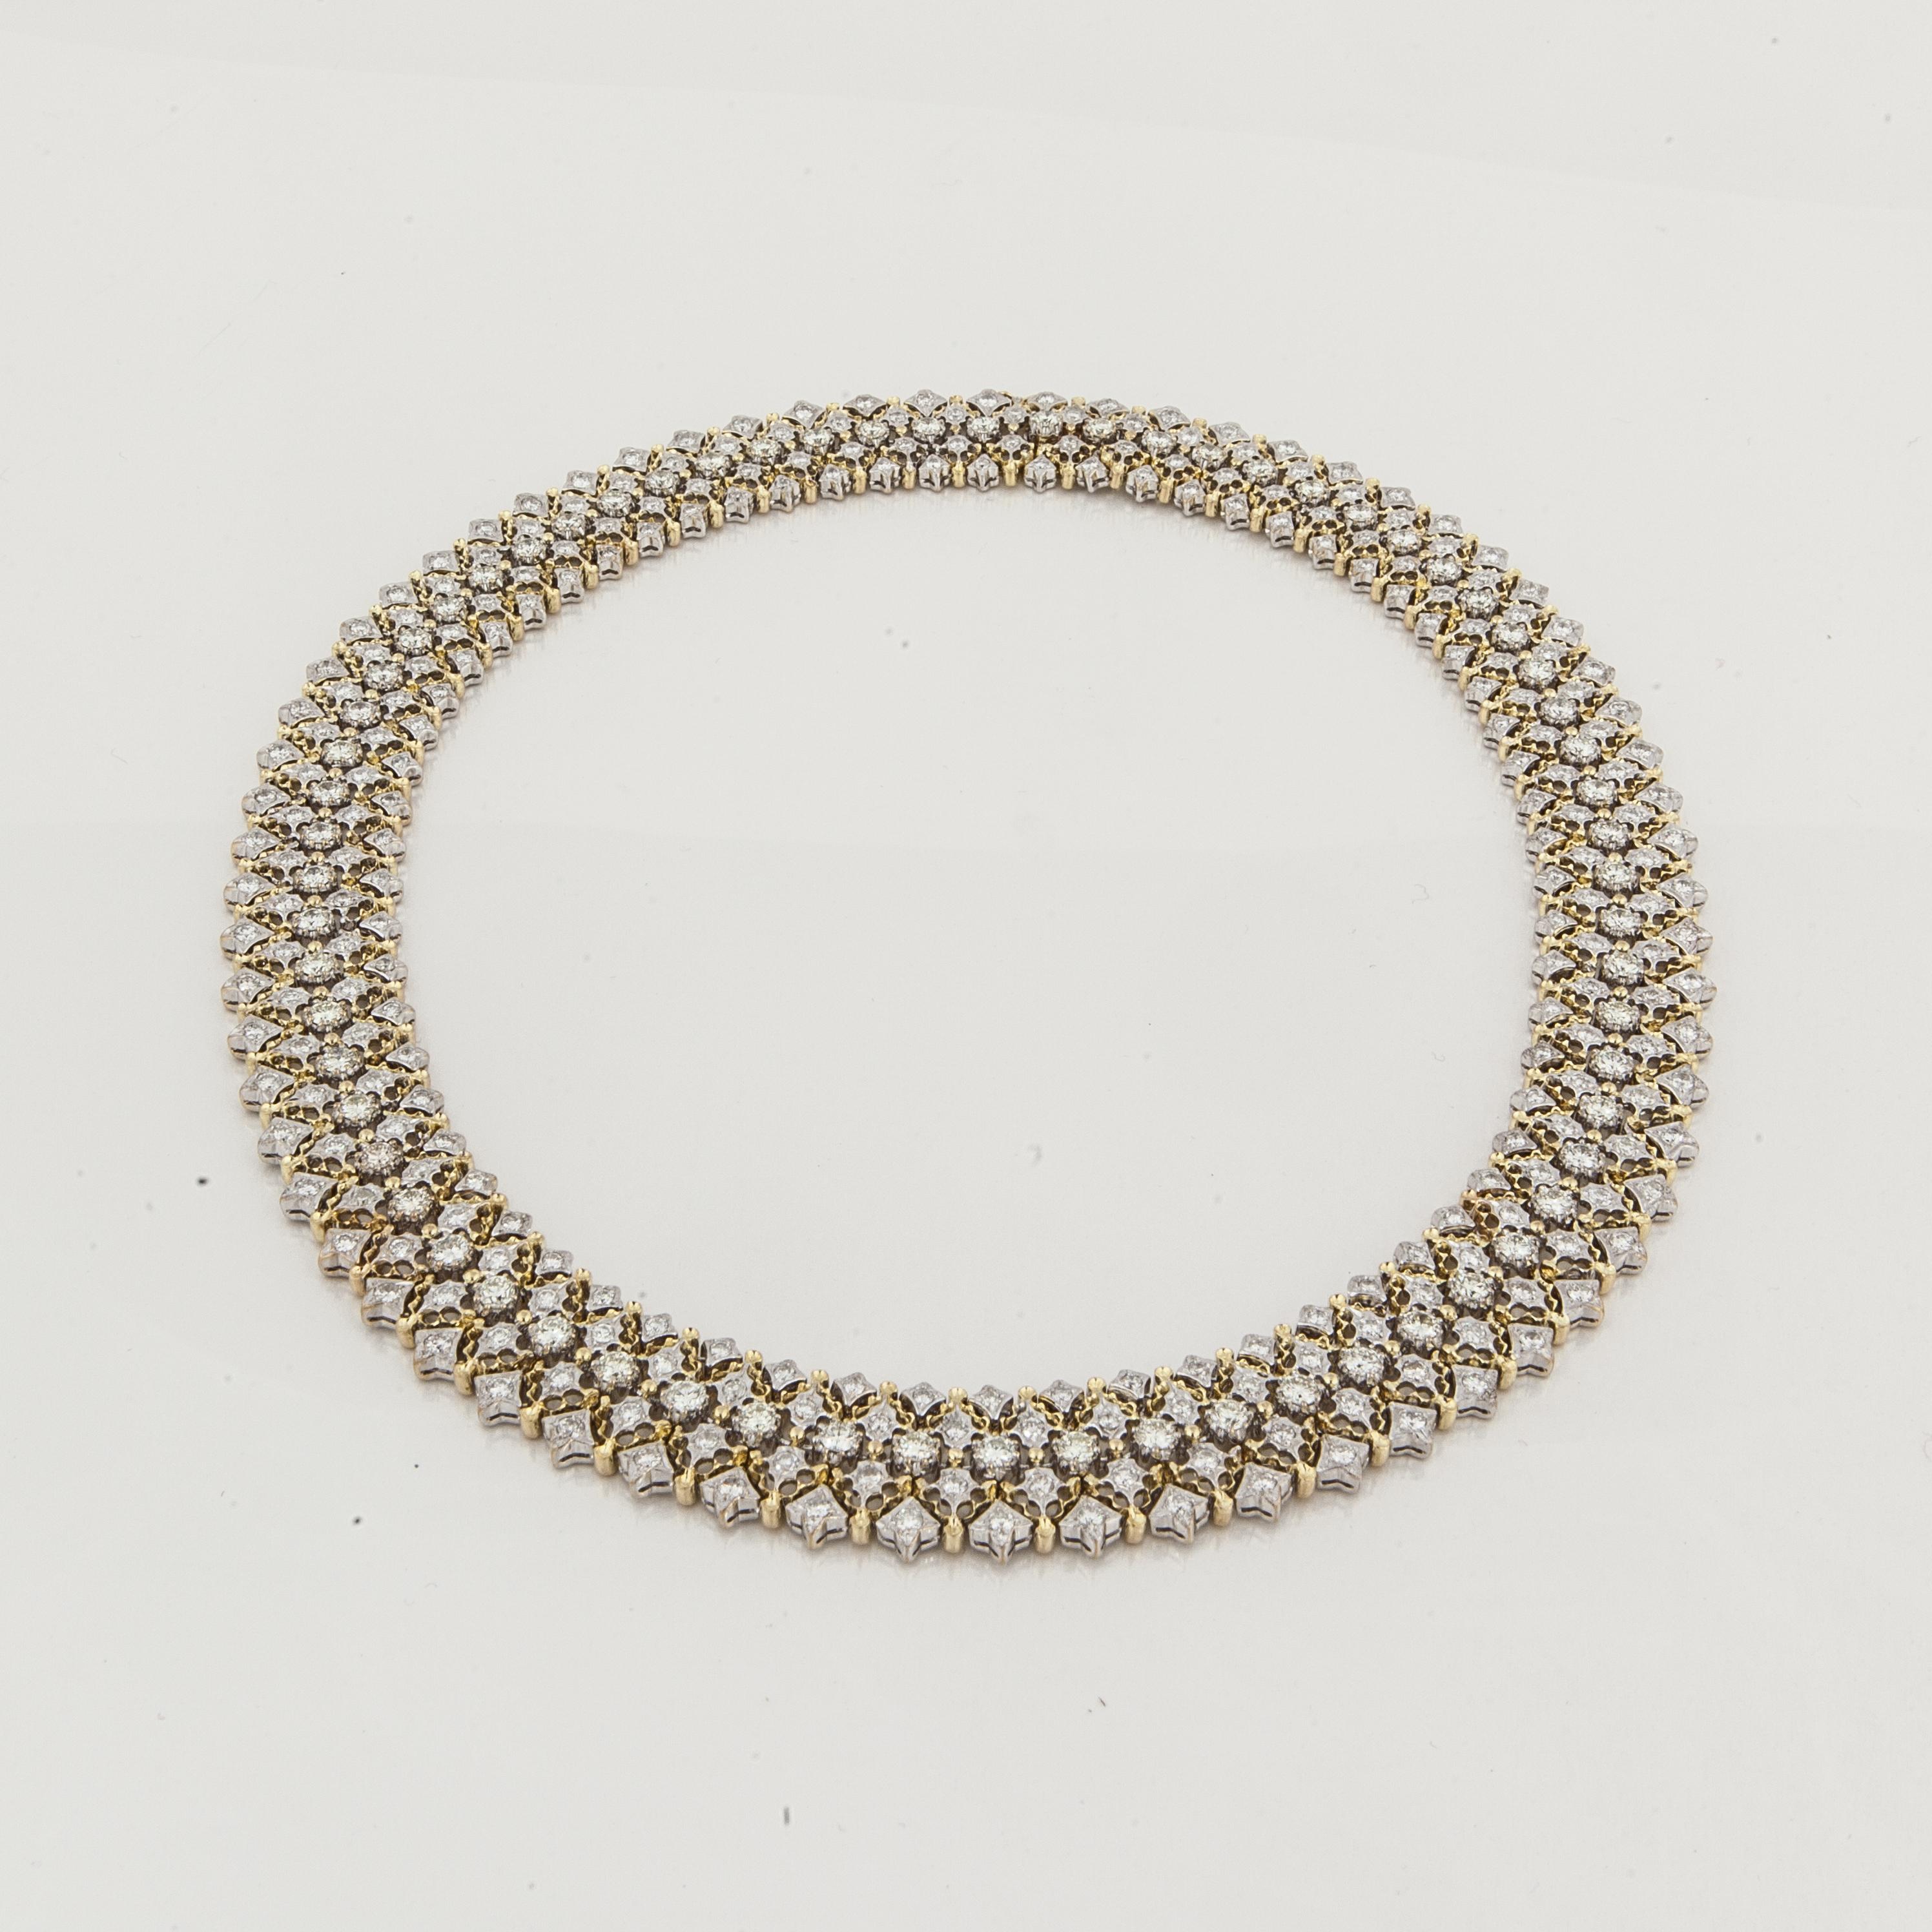 This collar necklace is 18K yellow and white gold and encrusted with round diamonds.  There are 335 round diamonds totaling 16.25 carats; H-I color and VS-SI clarity.  The necklace measures 17.25 inches long and is 11/16 inches wide.  